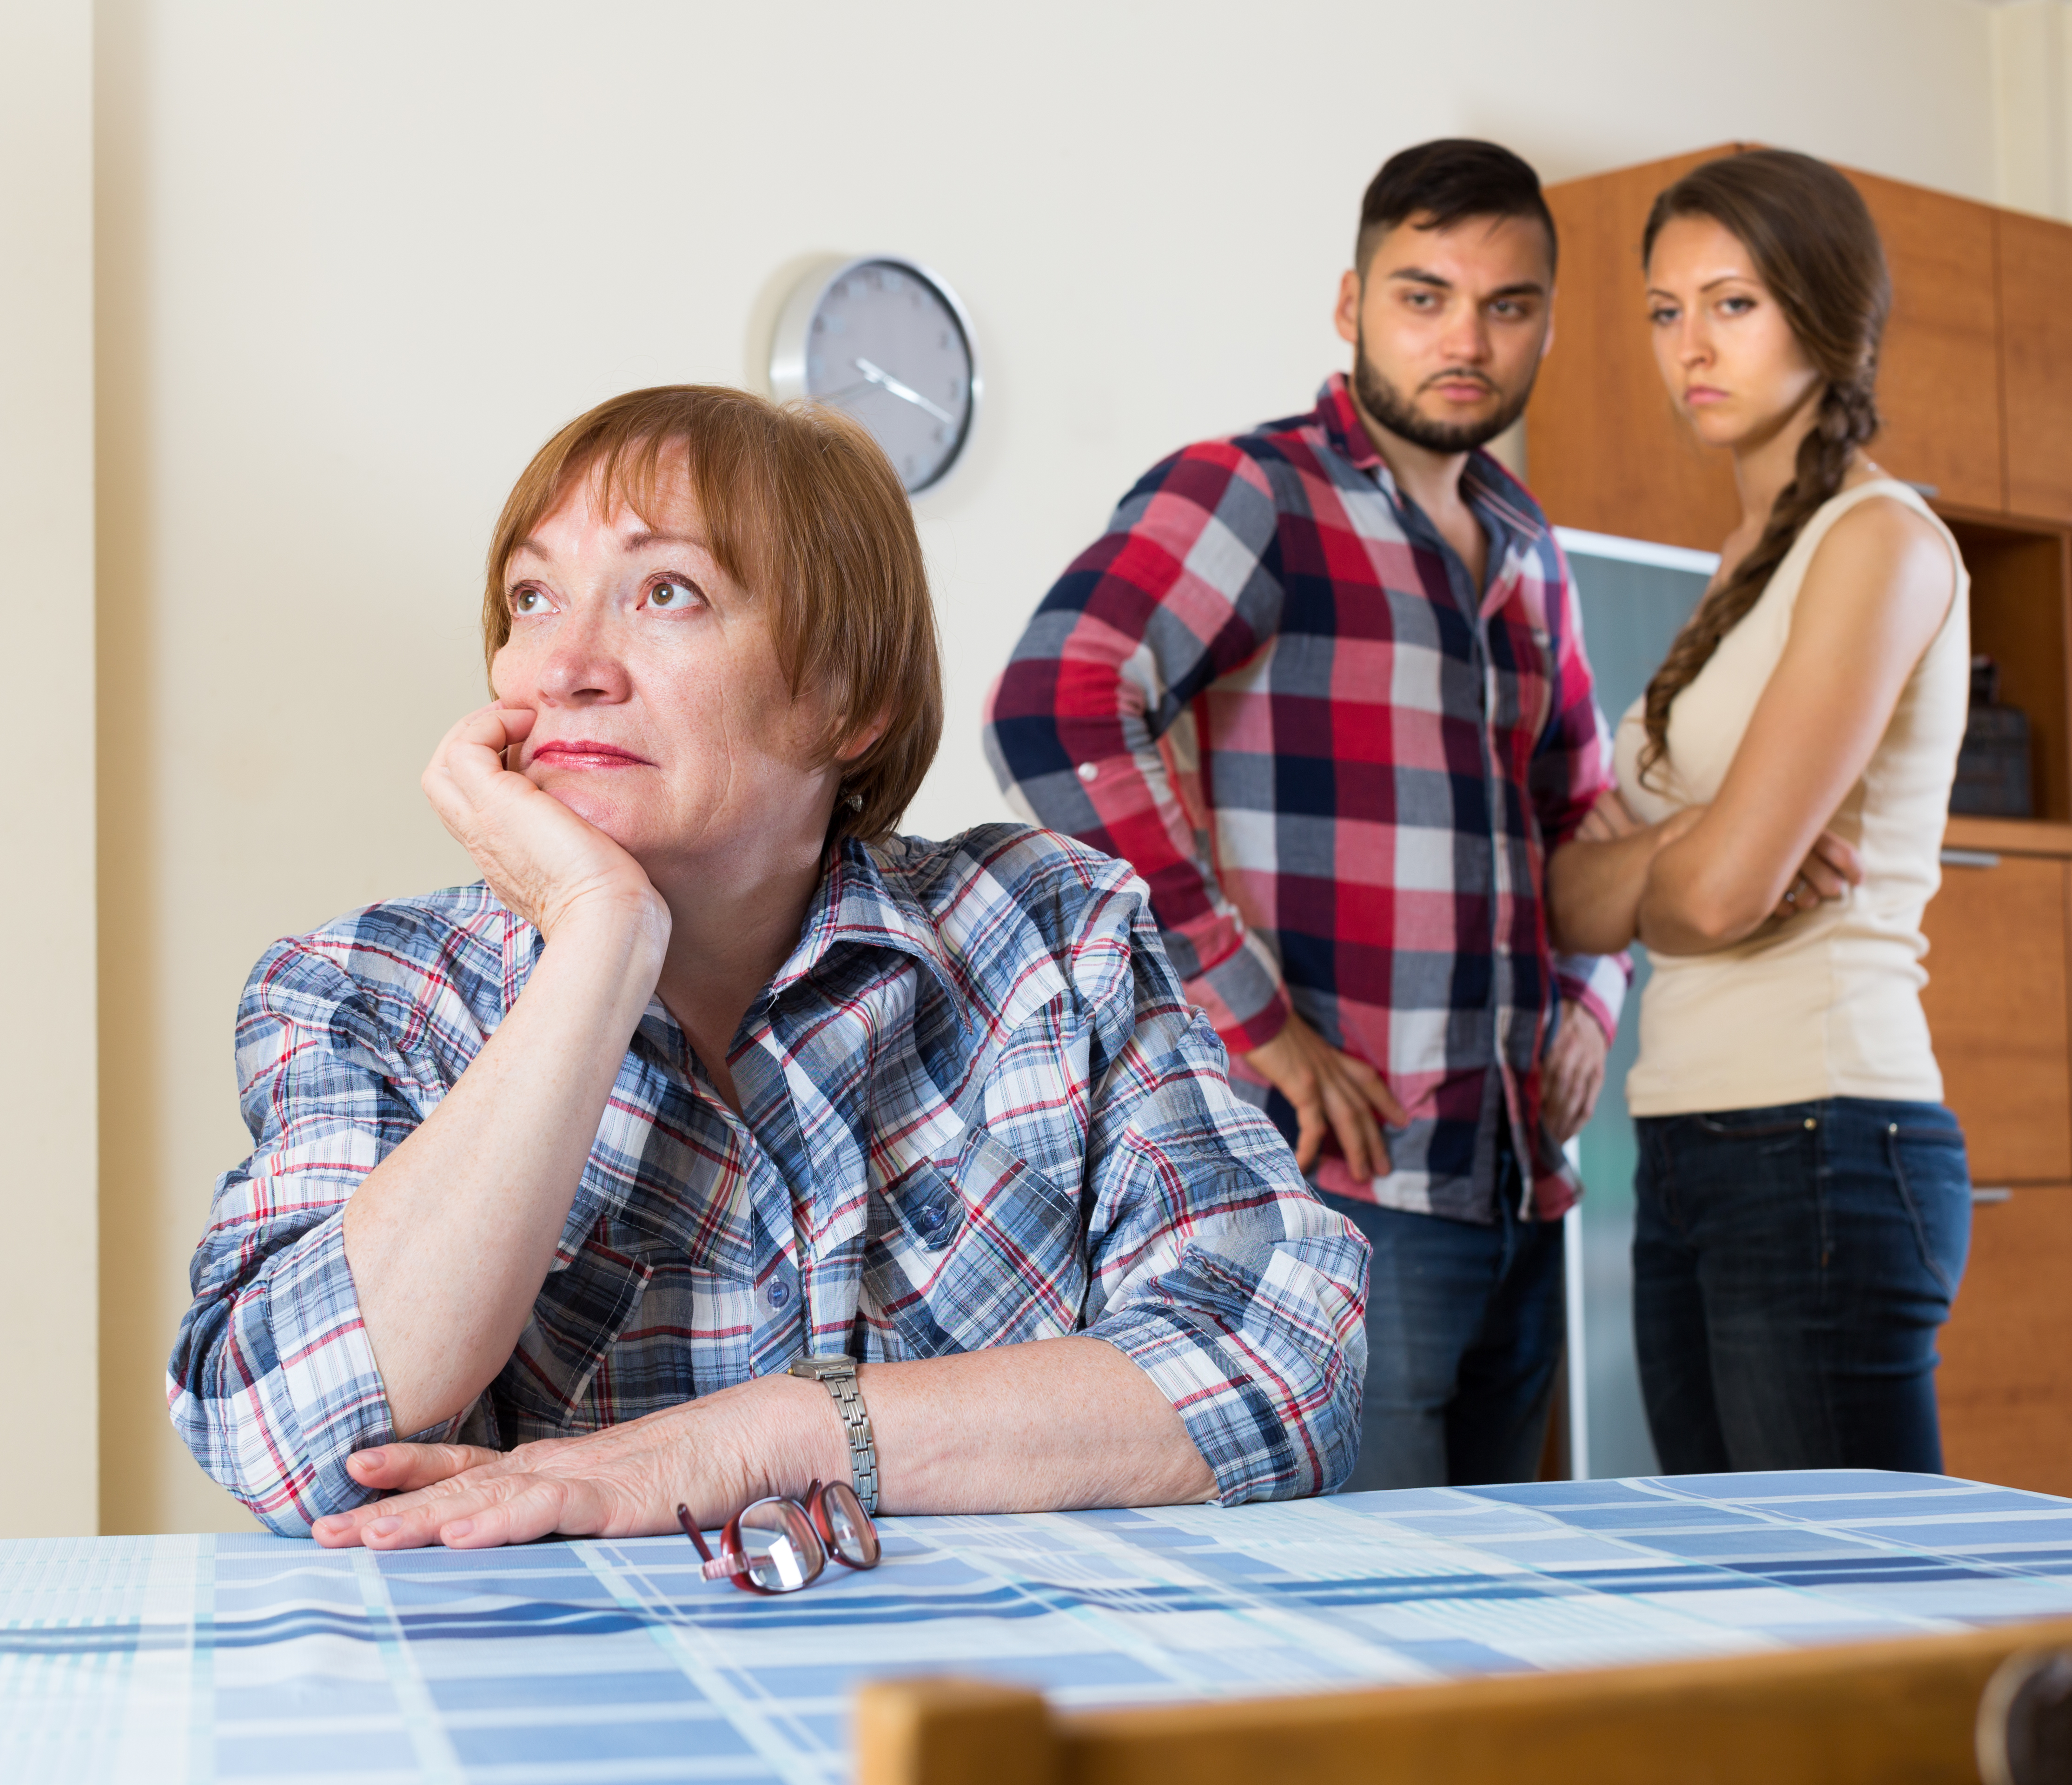 An upset couple standing in the background looking at a smug older woman | Source: Shutterstock